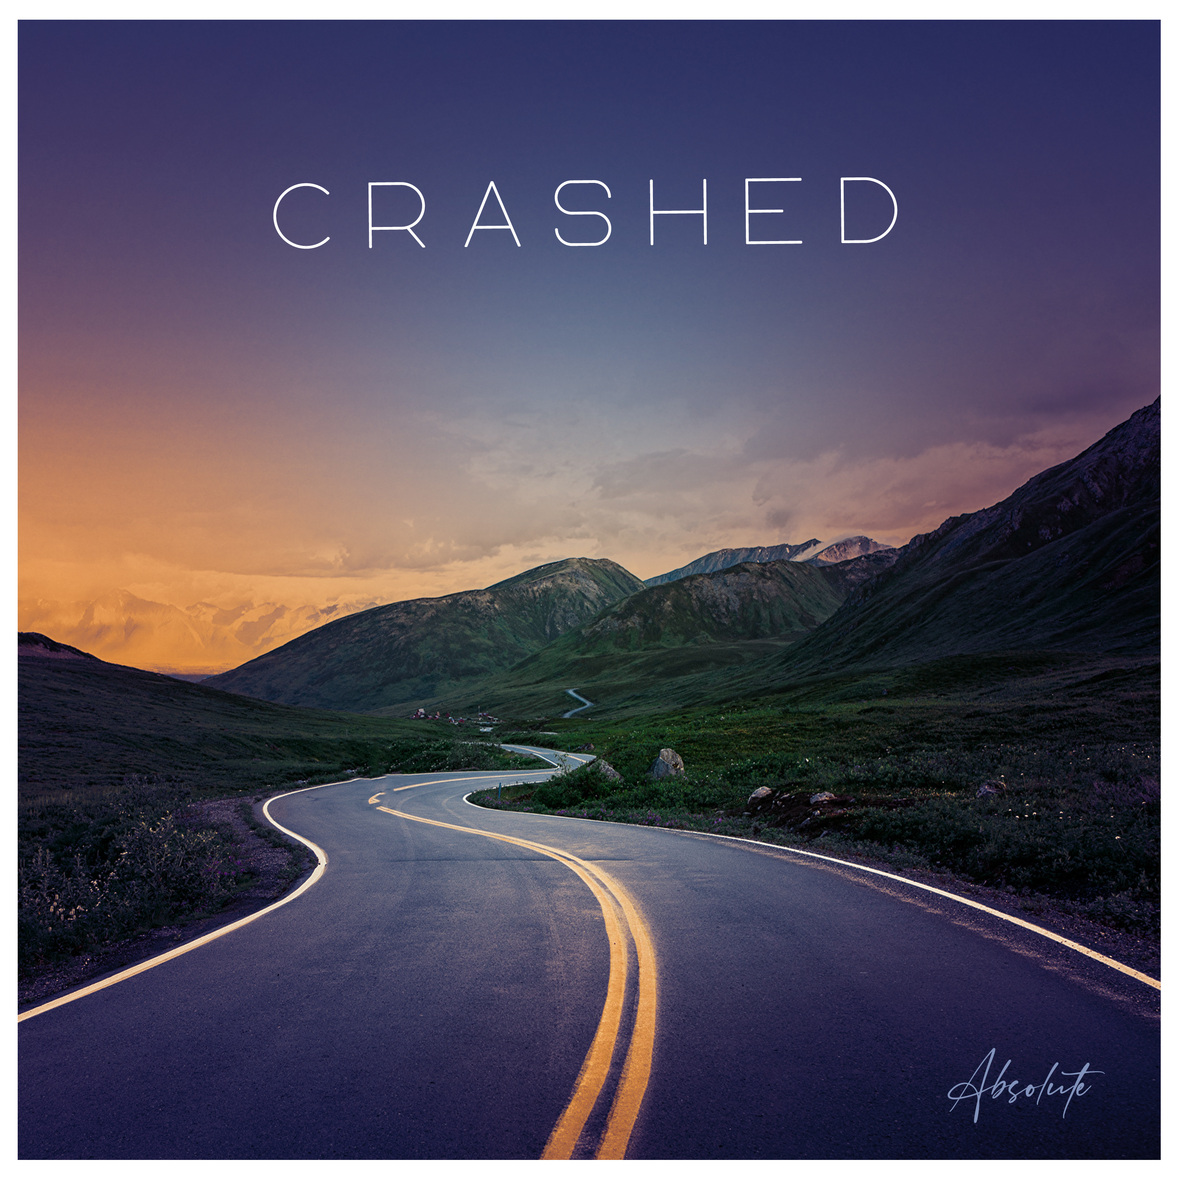 Absolute – “Crashed”